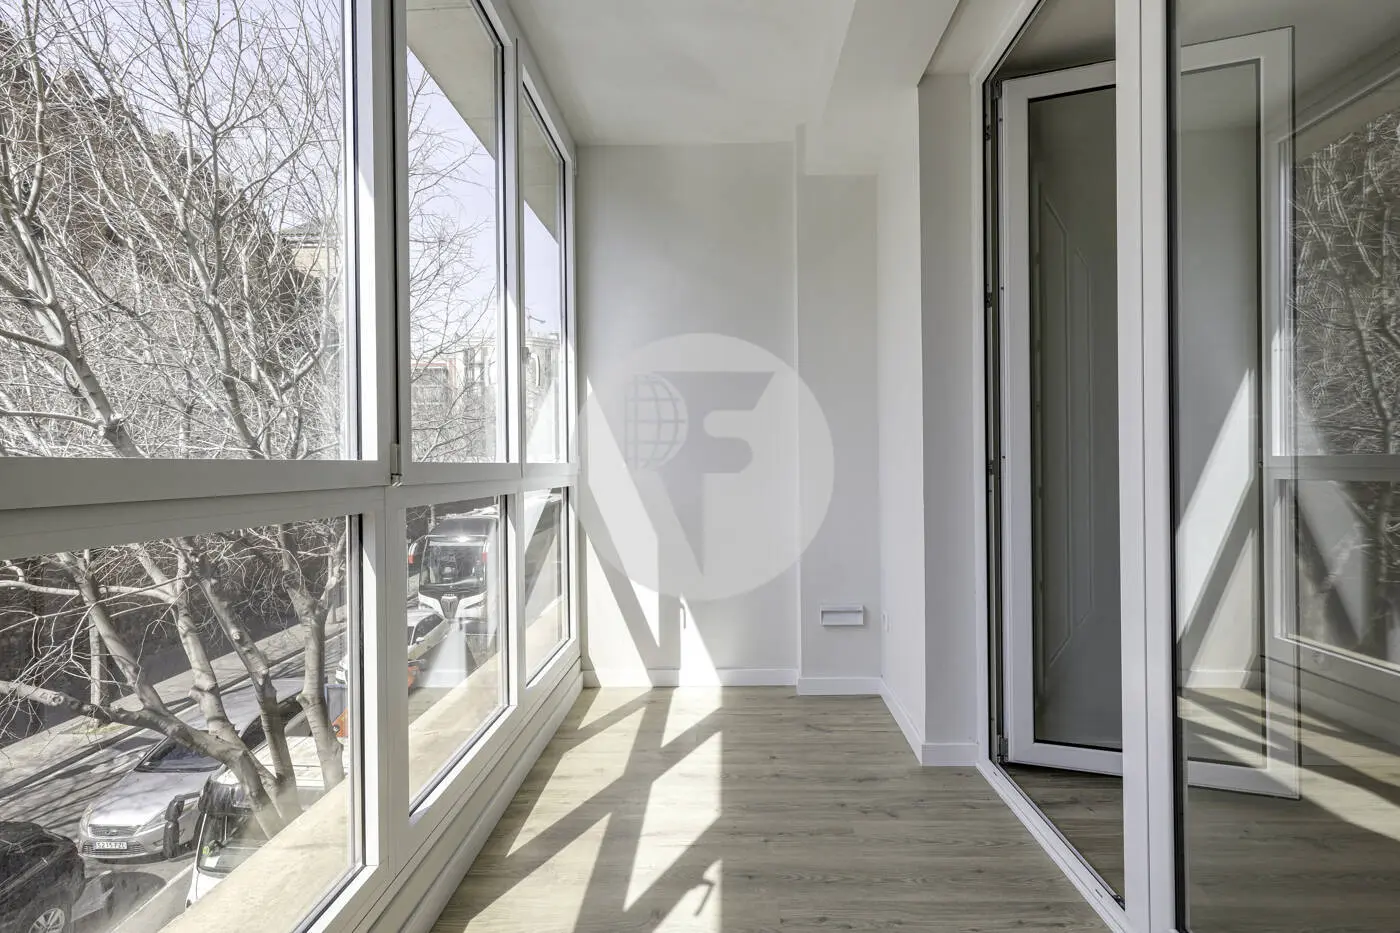 Apartment with three bedrooms and 2 bathrooms completely renovated, brand new 29